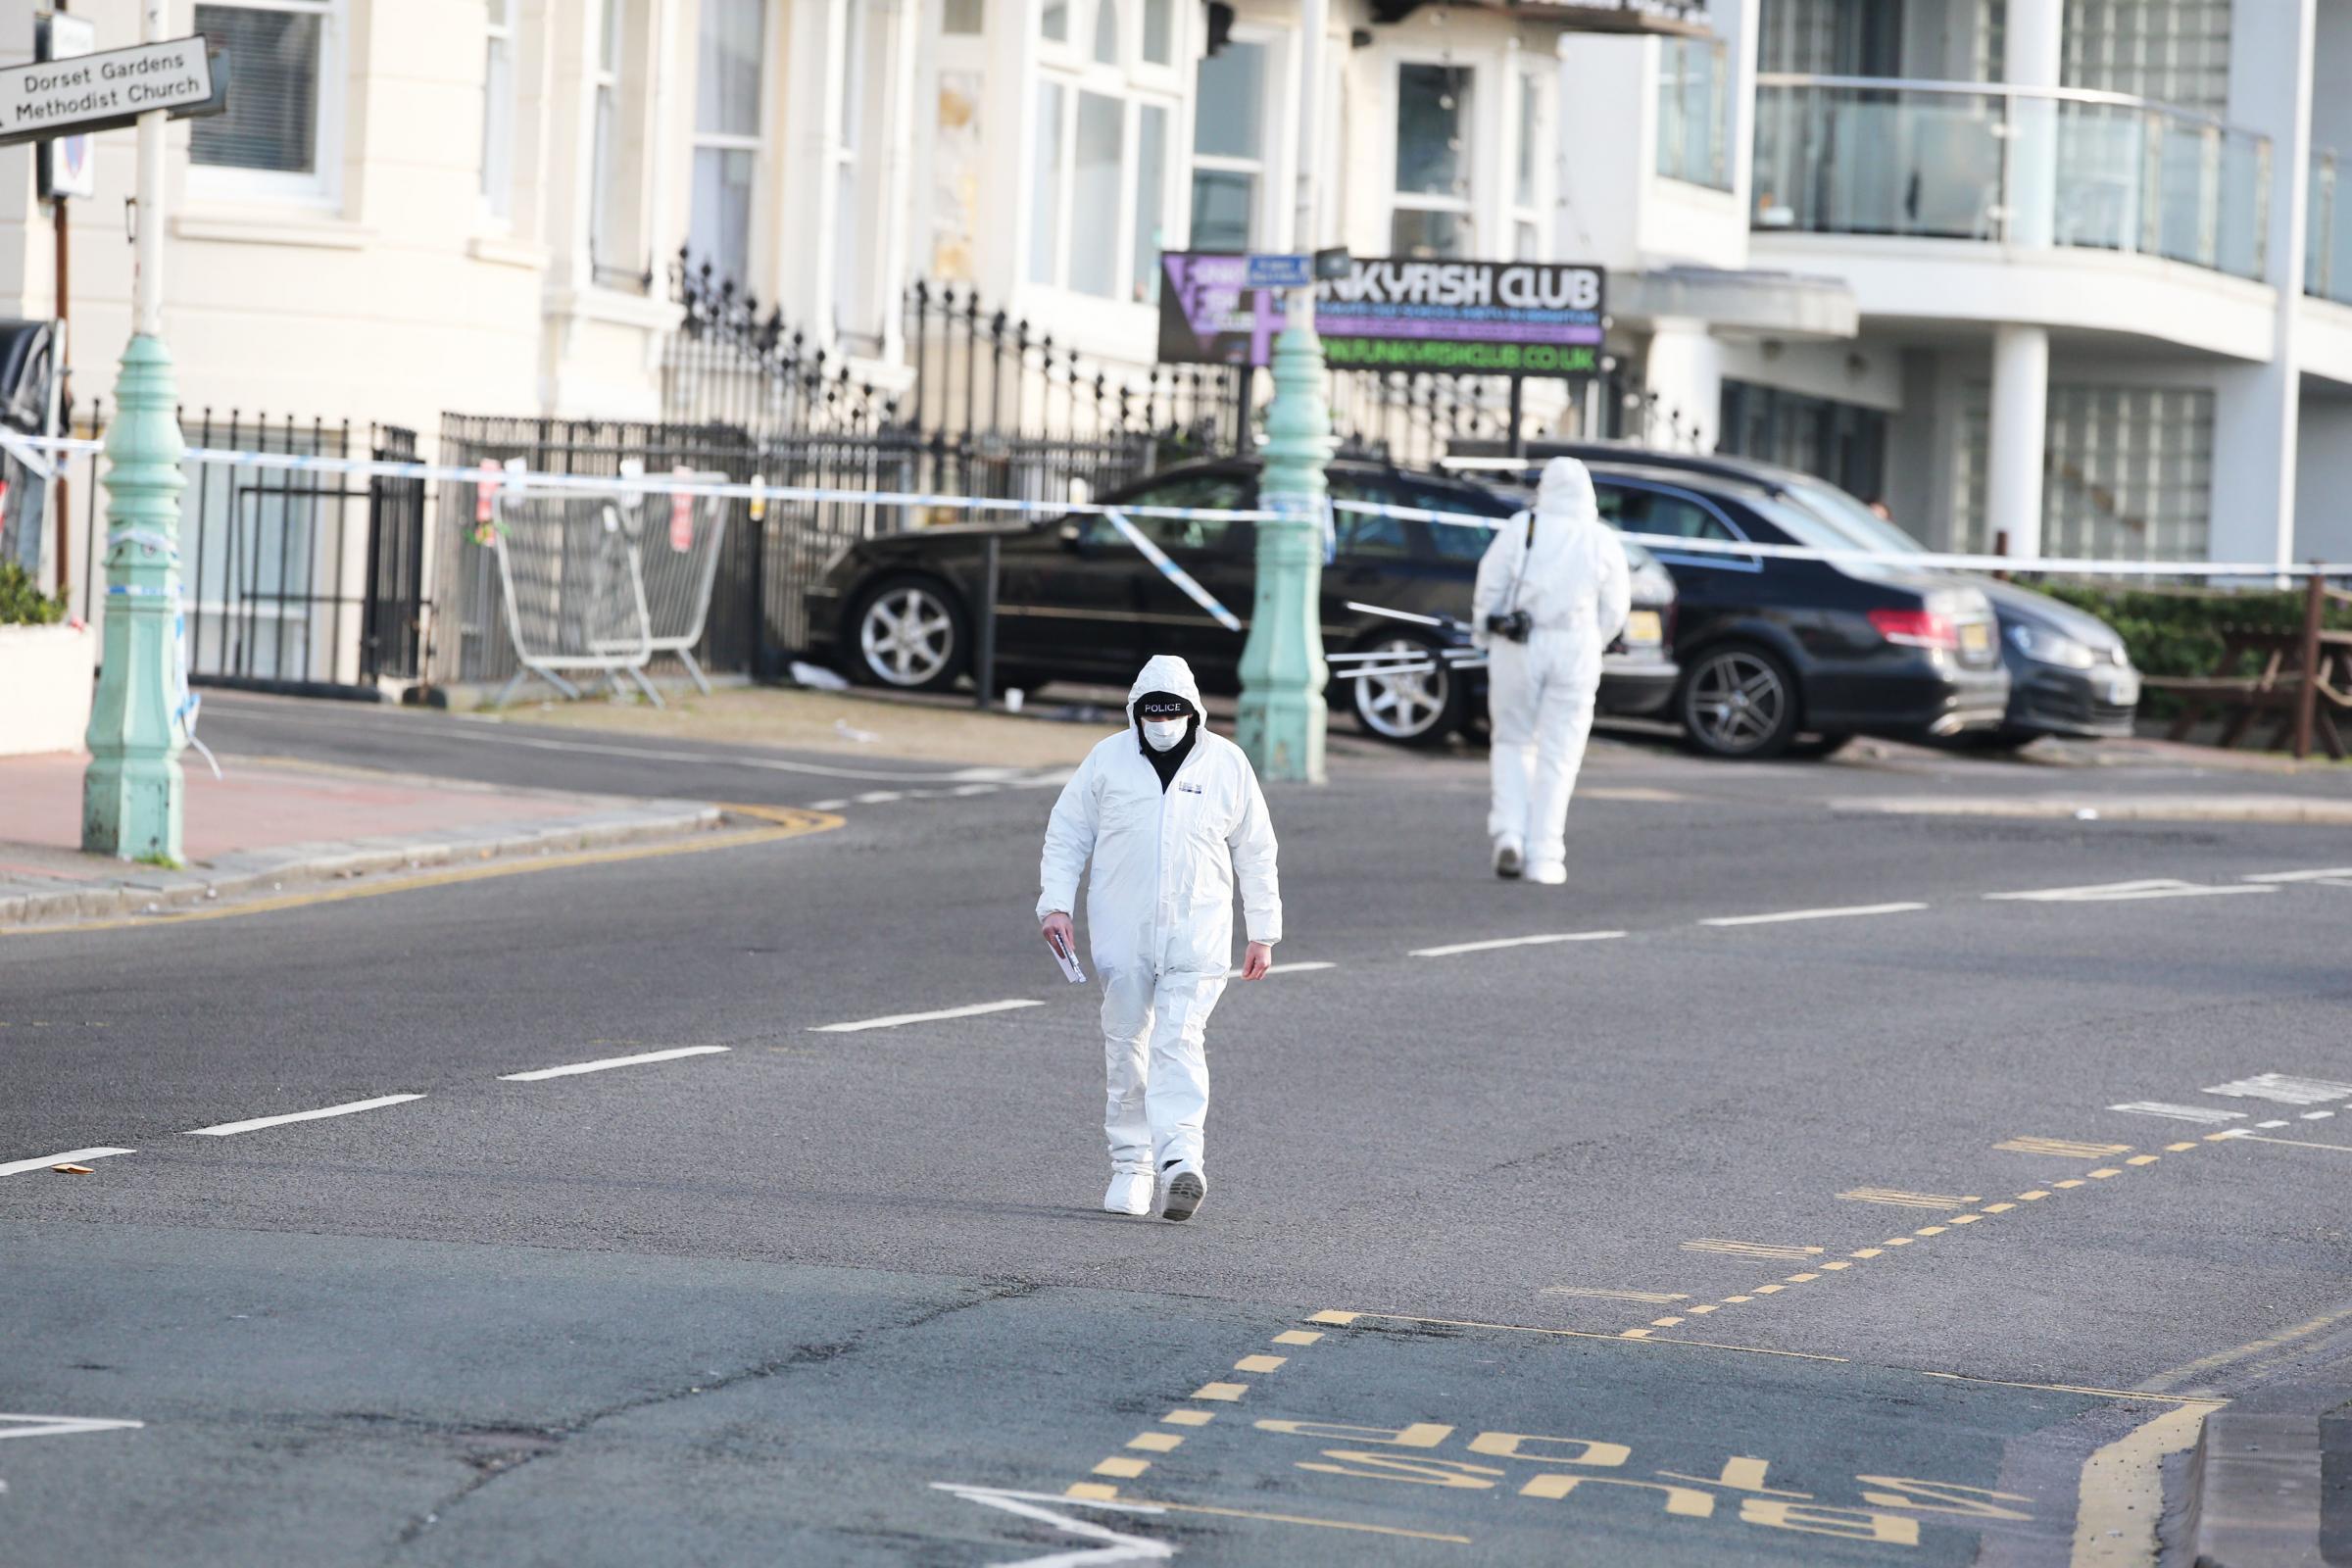 The scene in Brighton after the incident in Marine Parade where Suel Delgado was killed in a suspected hit and run